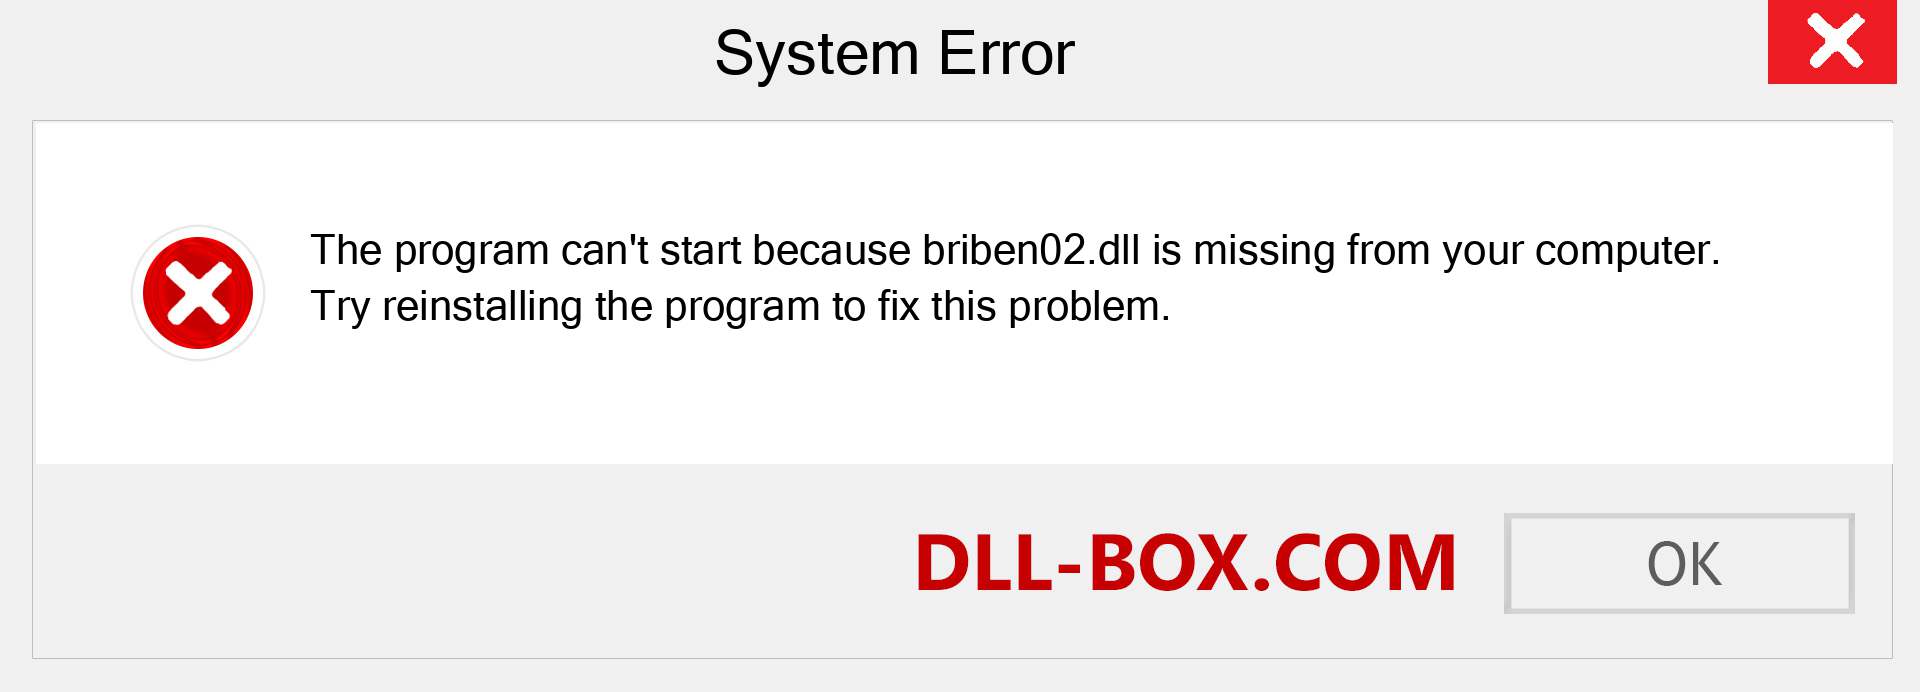  briben02.dll file is missing?. Download for Windows 7, 8, 10 - Fix  briben02 dll Missing Error on Windows, photos, images